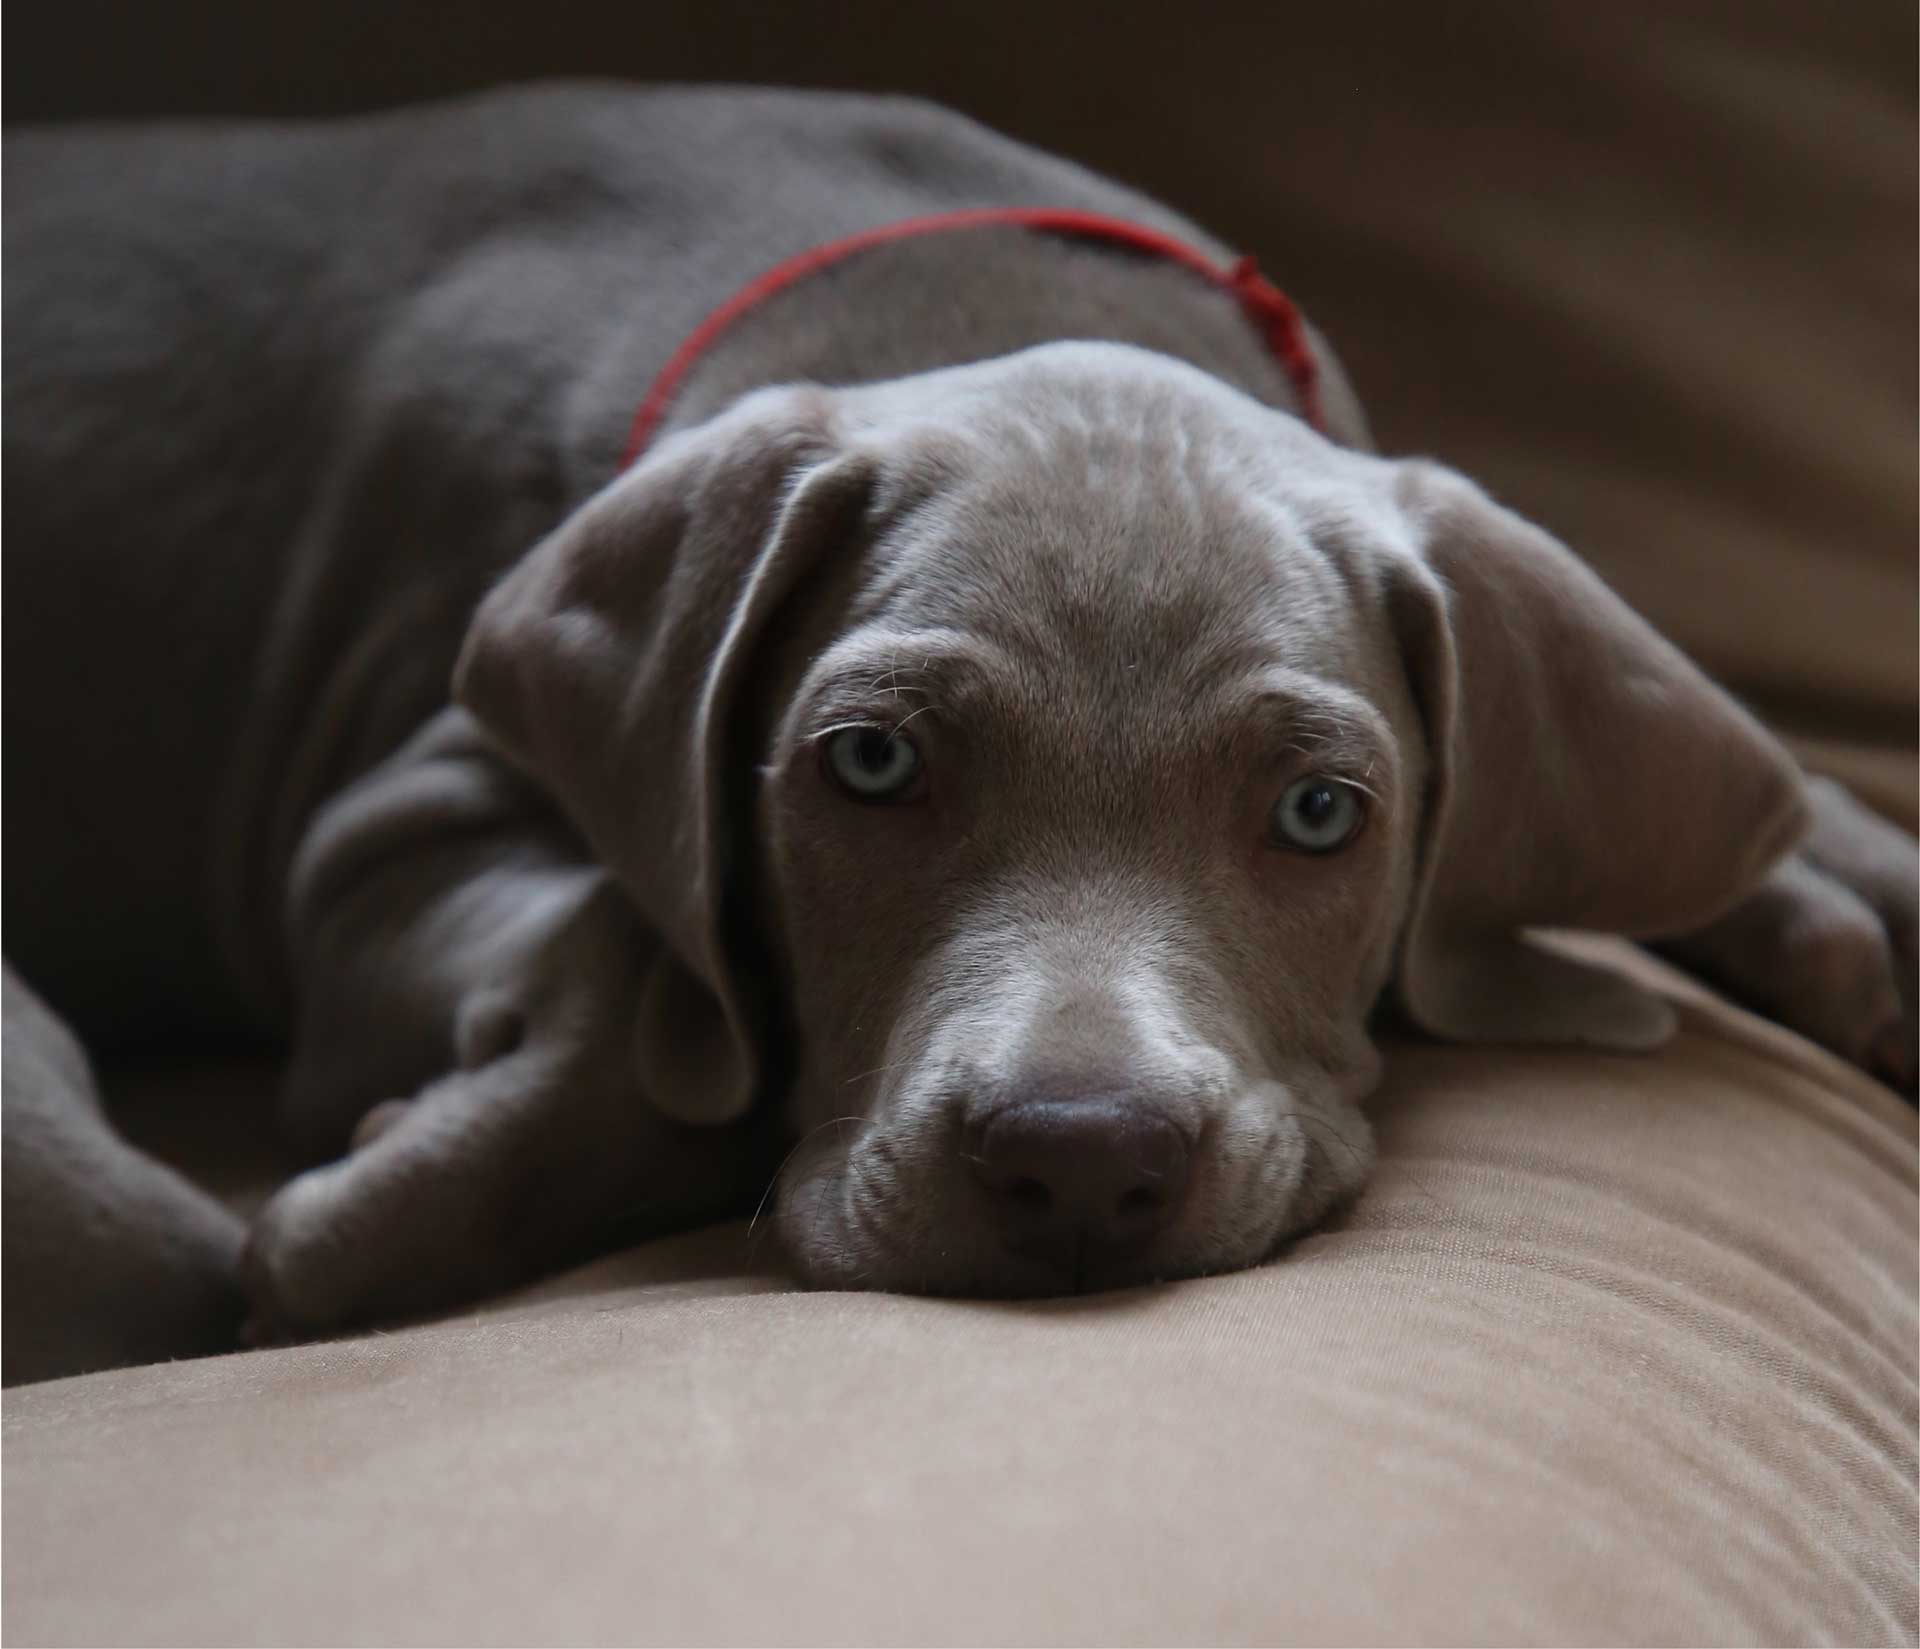 Gray Lab Laying Down on Couch Looking At Camera